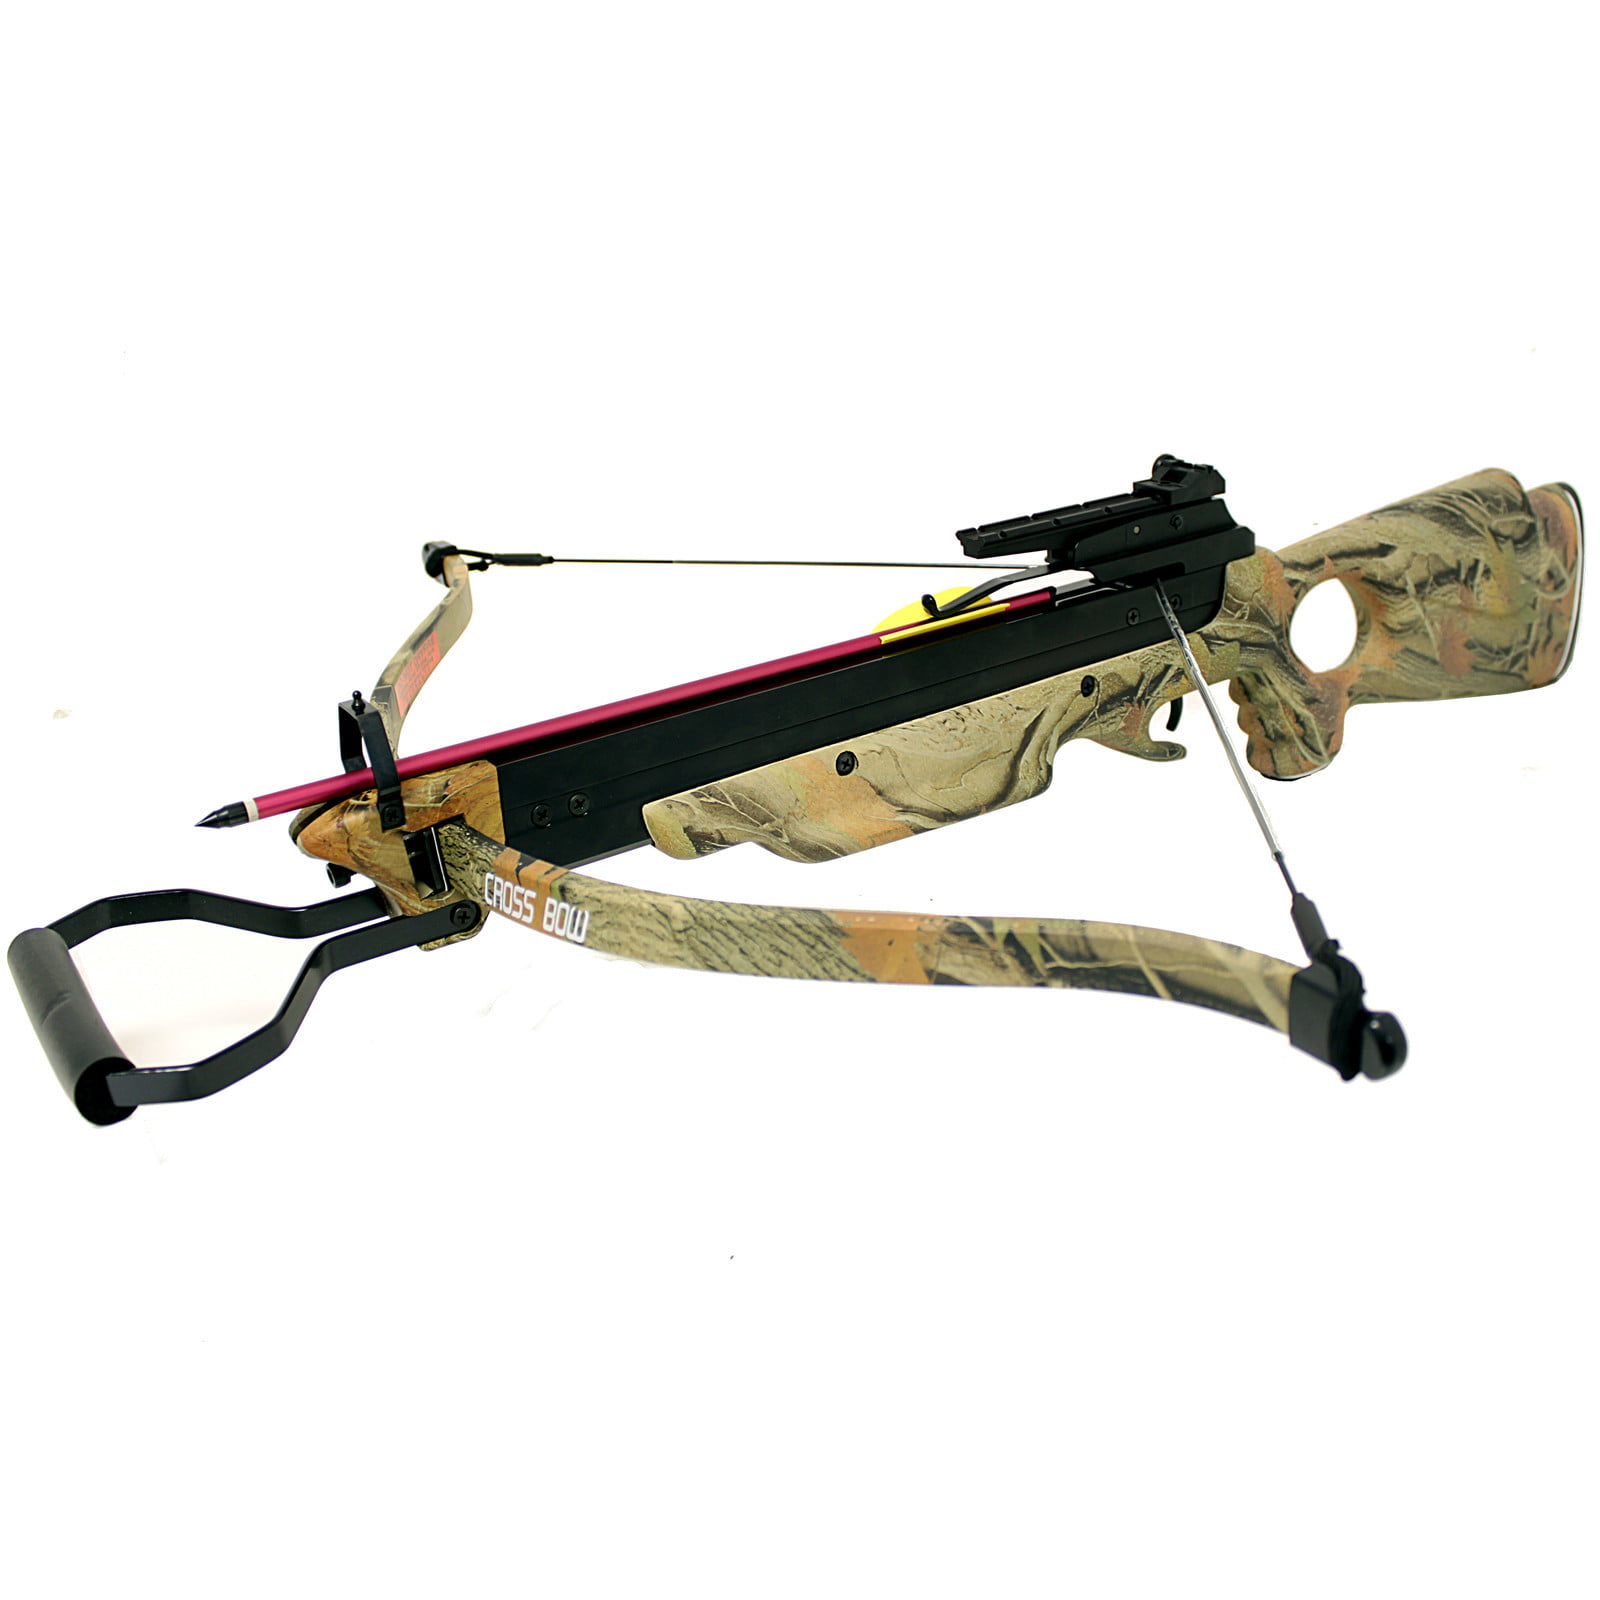 150 lbs panther compound crossbow